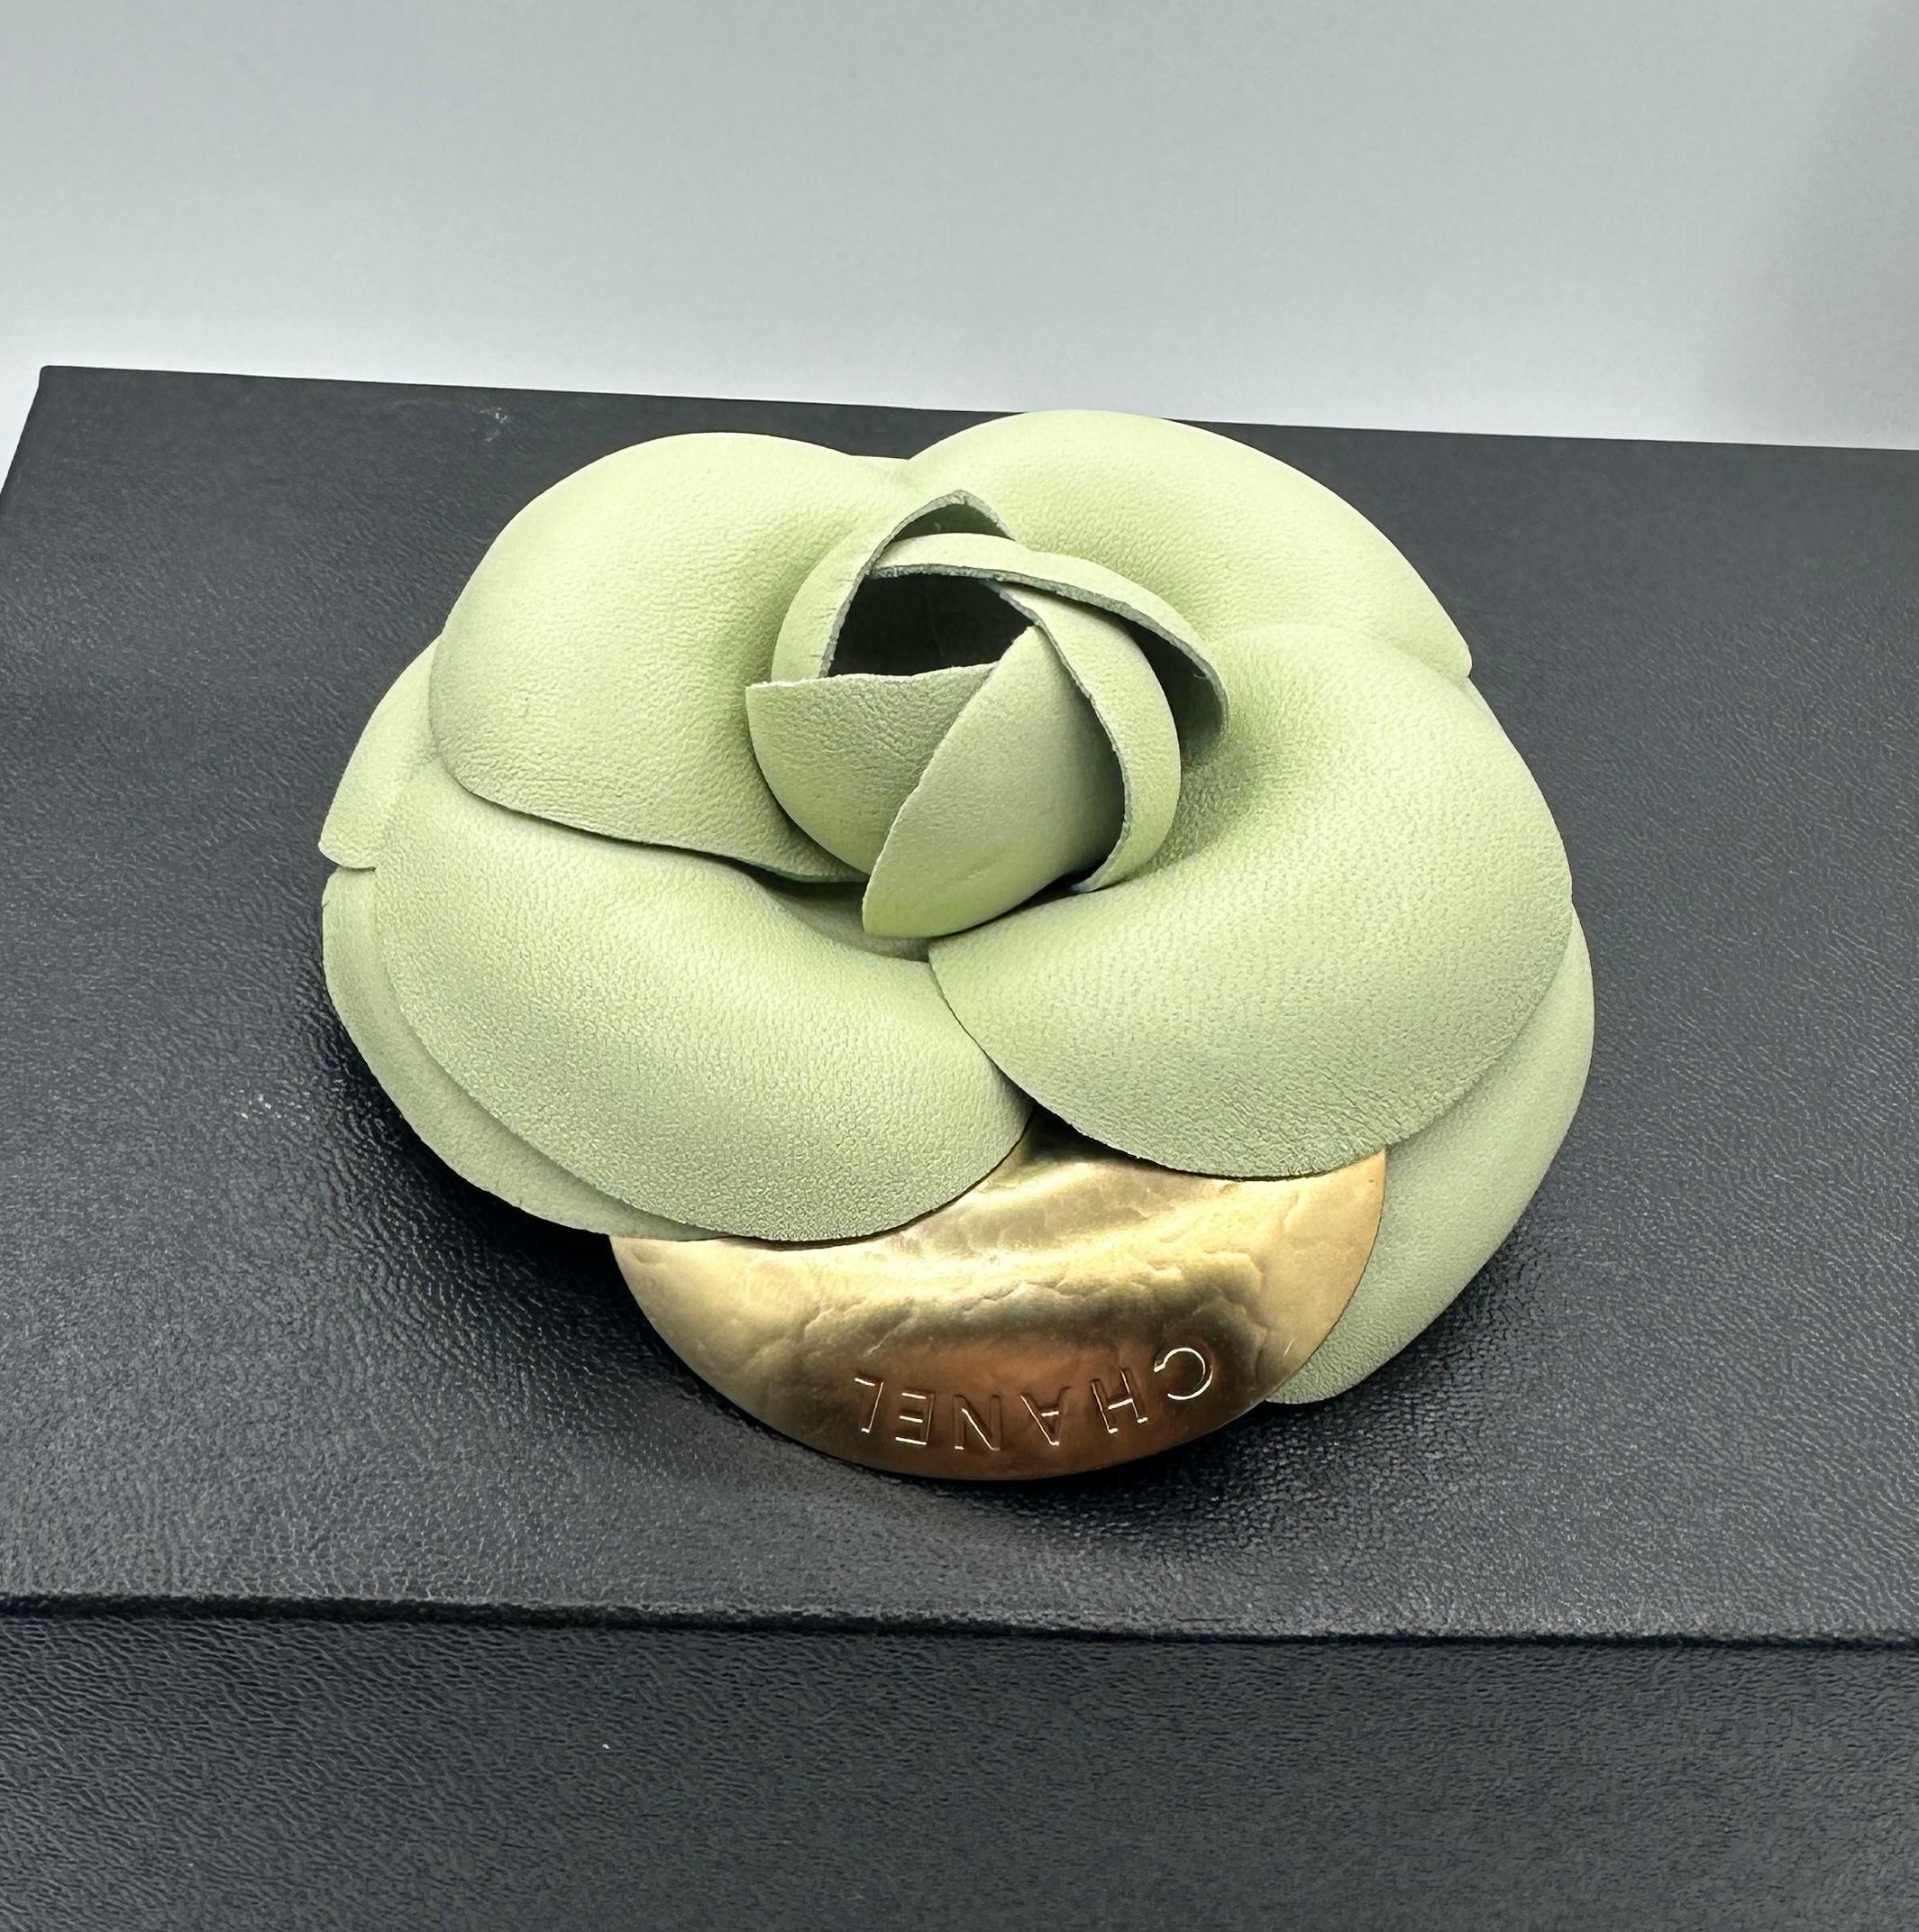 Vintage Chanel Camellia Flower Leather Brooch Seafoam Green Made In France In Excellent Condition For Sale In New York, NY